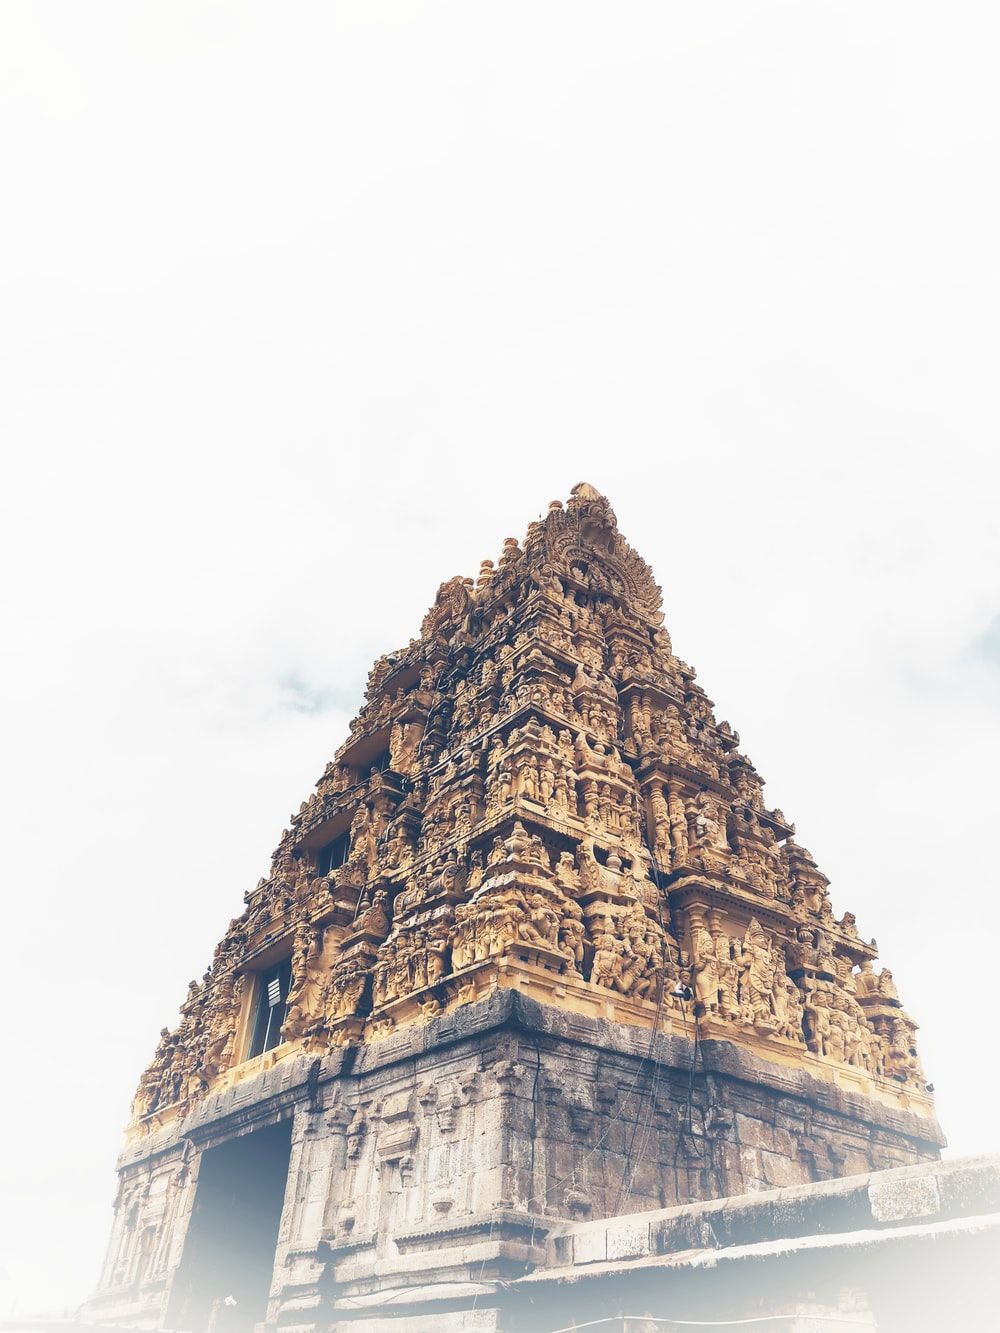 Ancient India Pictures  Download Free Images on Unsplash